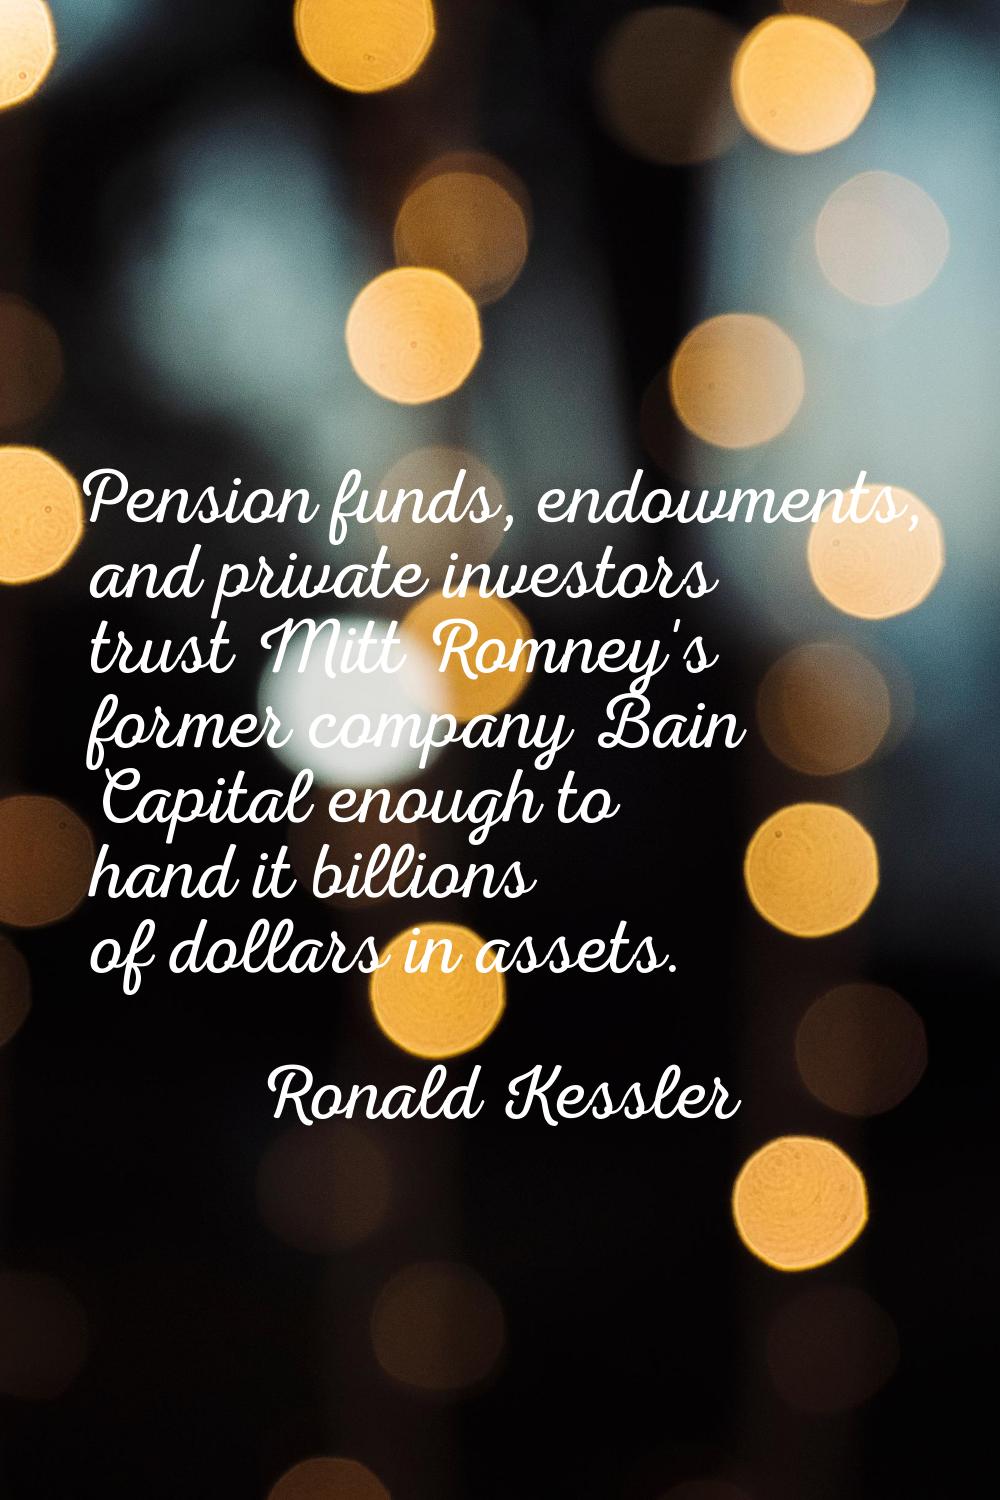 Pension funds, endowments, and private investors trust Mitt Romney's former company Bain Capital en